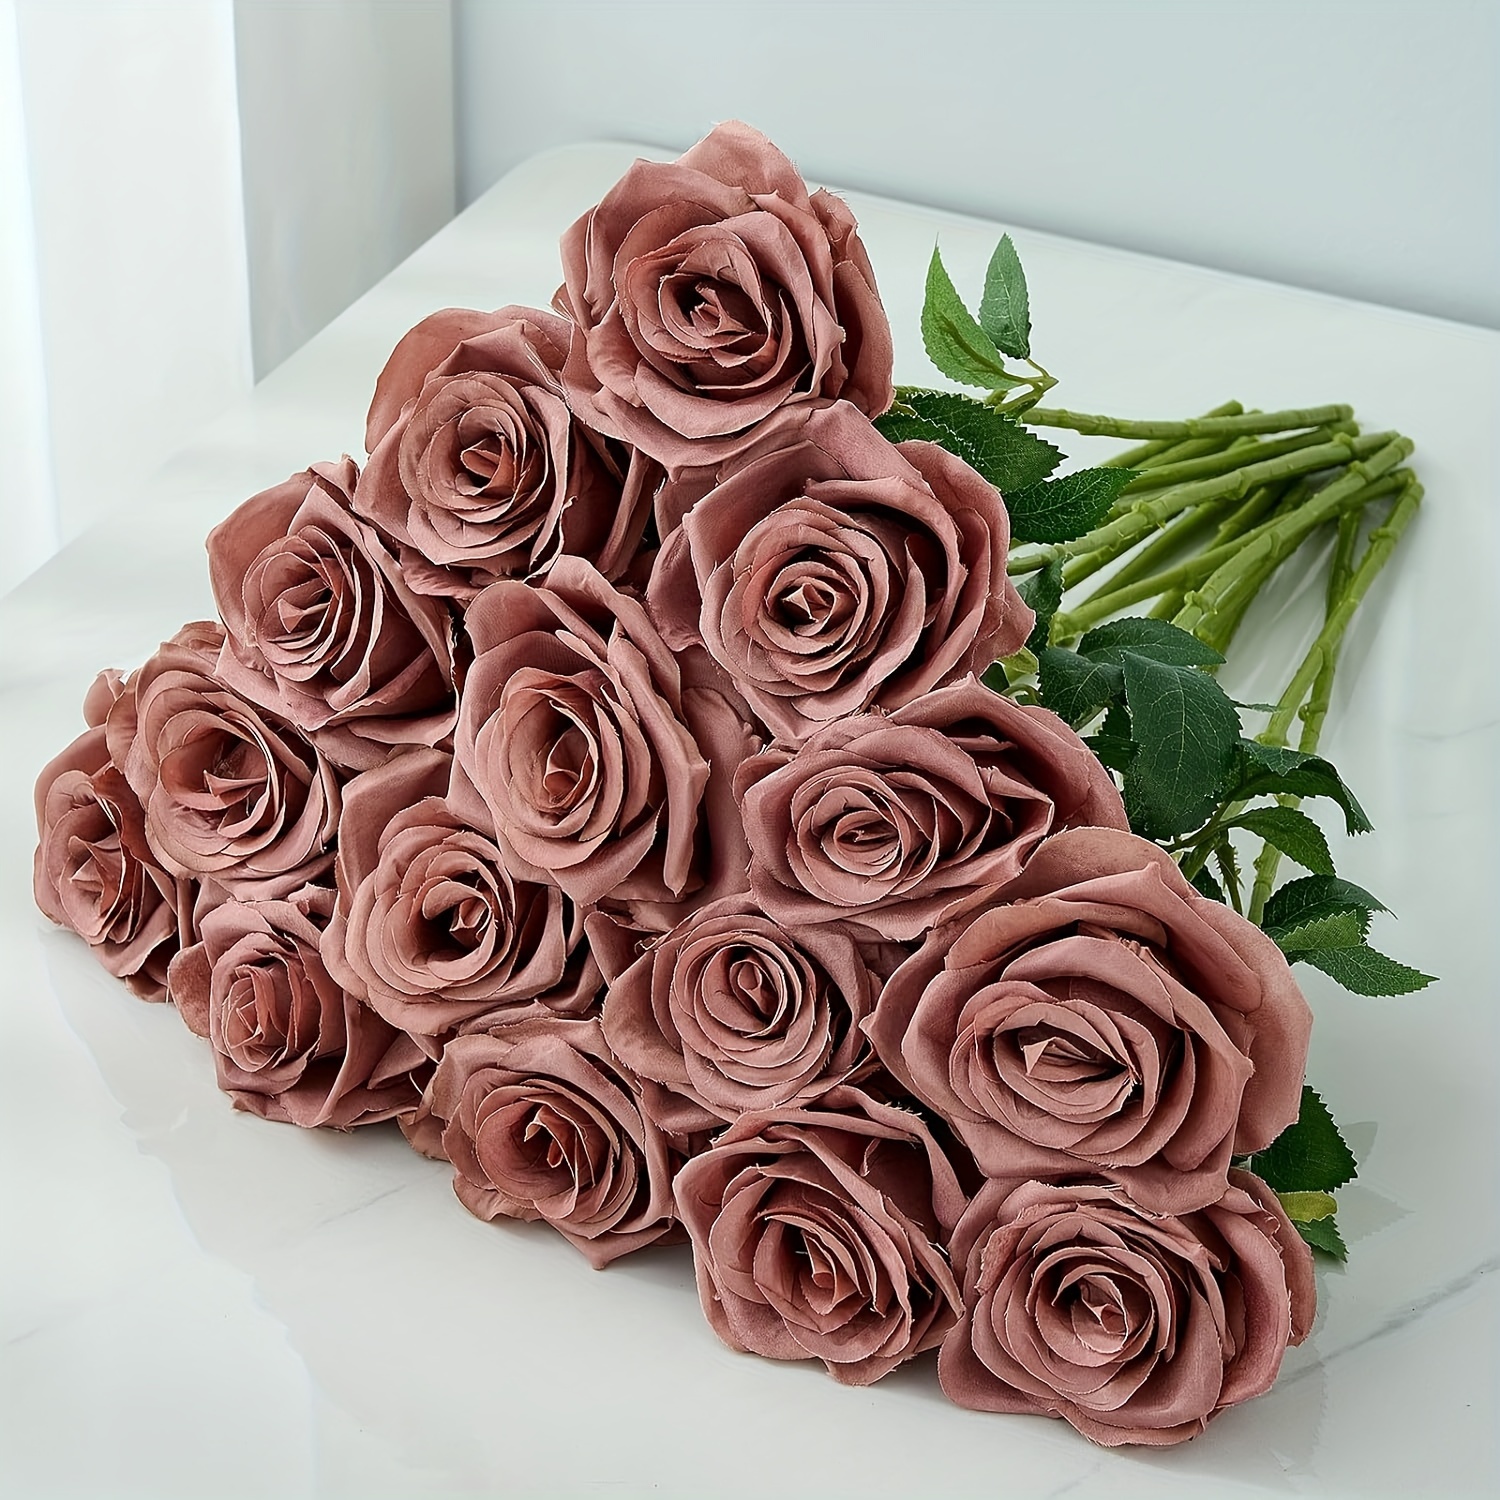 

6-piece Lifelike Dusty Rose Artificial Flowers With Long Stems - Perfect For Wedding & Party Decorations Bouquet Accessories Flower Bouquet Accessories